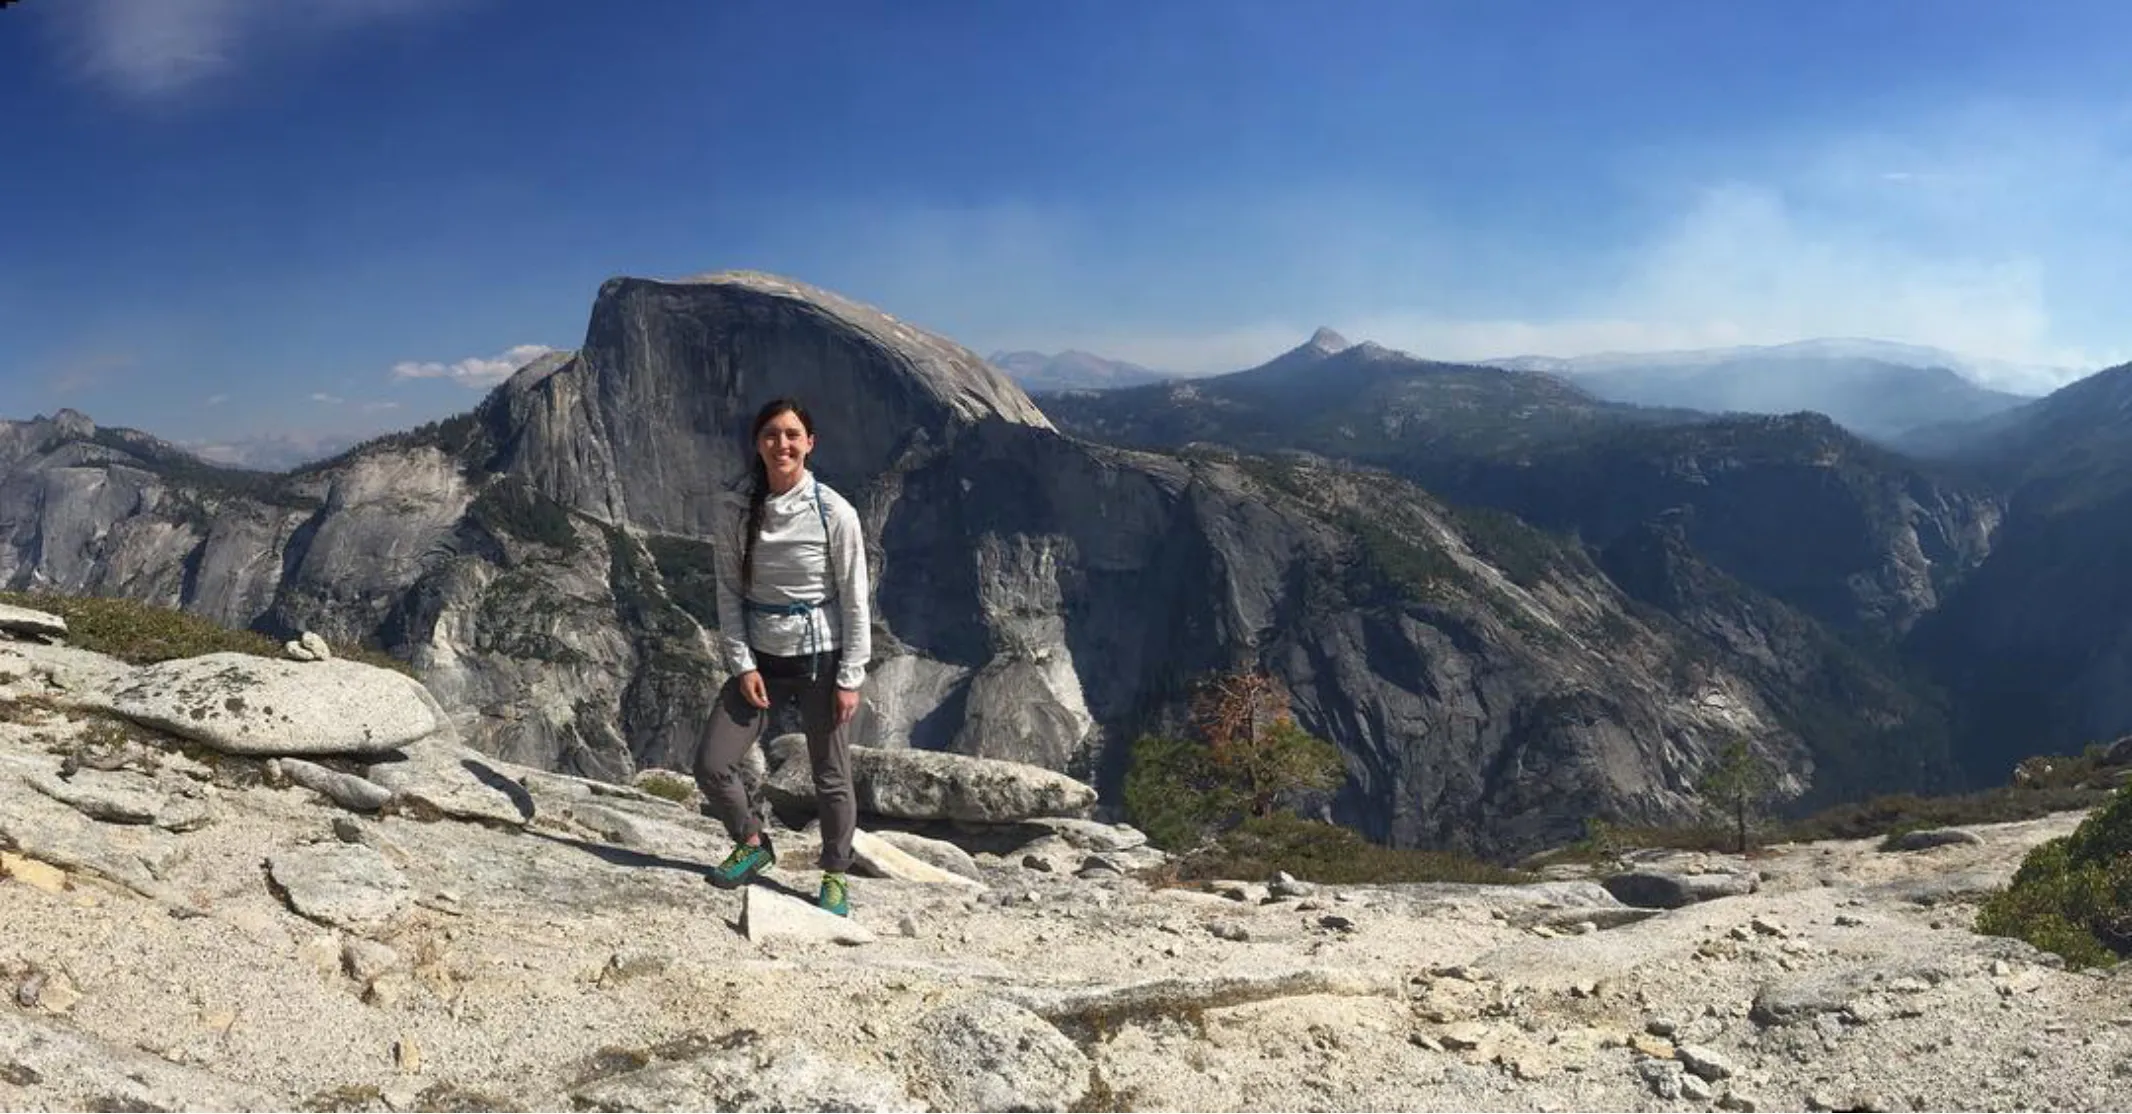 Meet the 29-Year-Old Data Scientist Who Ditched Her Job to Become a Full-Time Rock Climber